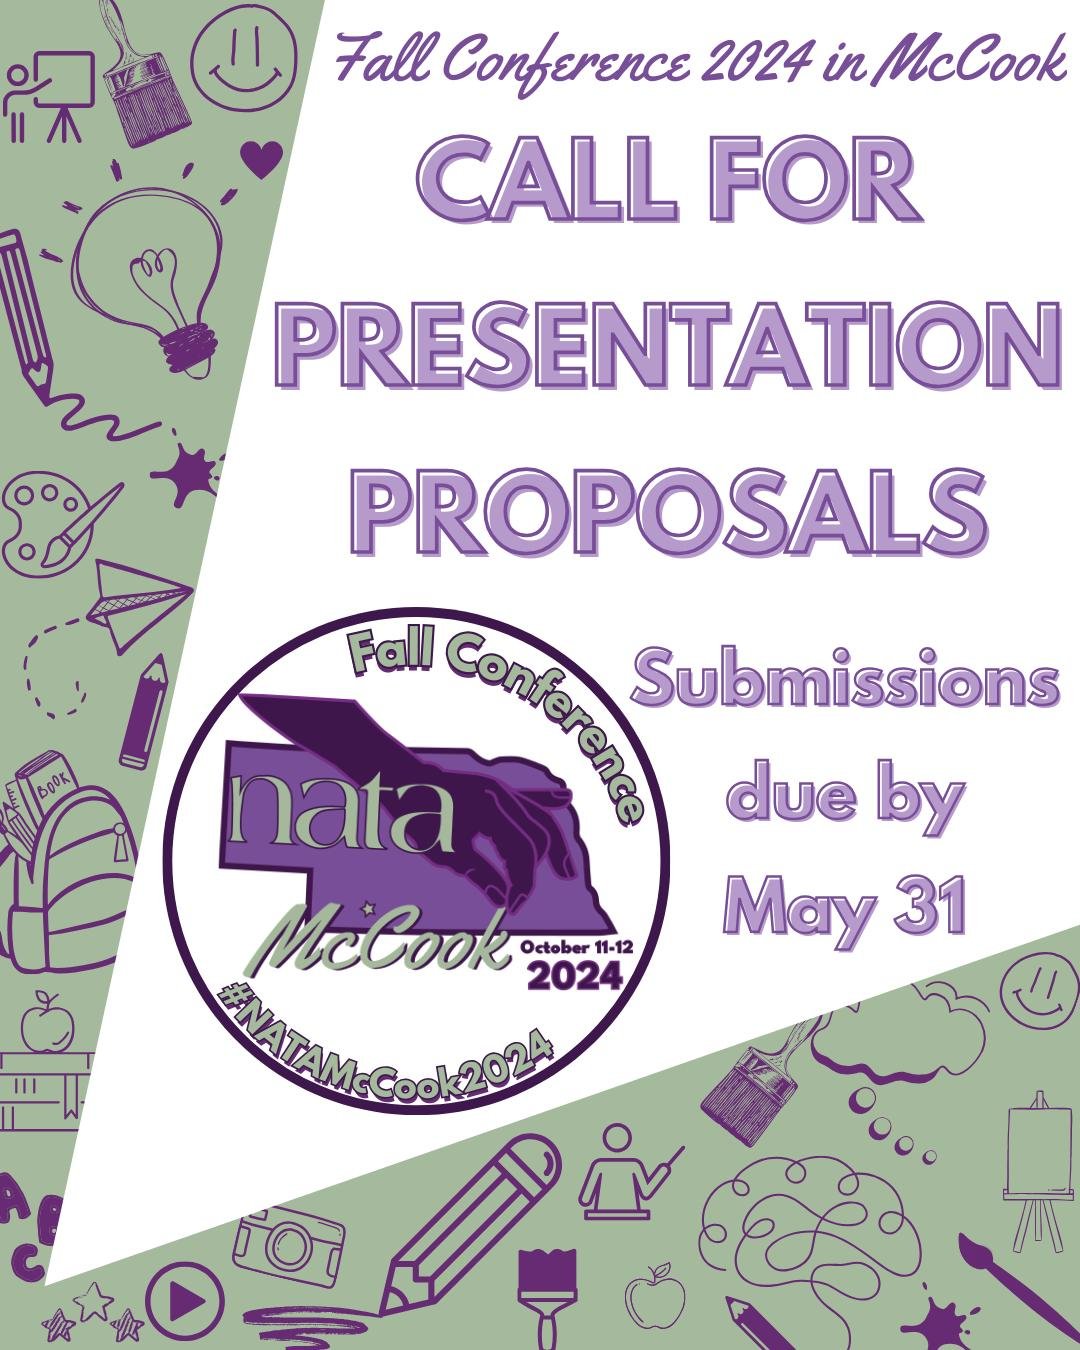 NATA members! Presentation proposals for Fall Conference 2024 in McCook on October 11-12 are now open.

Do you have a great idea for a hands-on workshop? A presentation for a special technique or a unique approach to teaching art? Or are you looking 